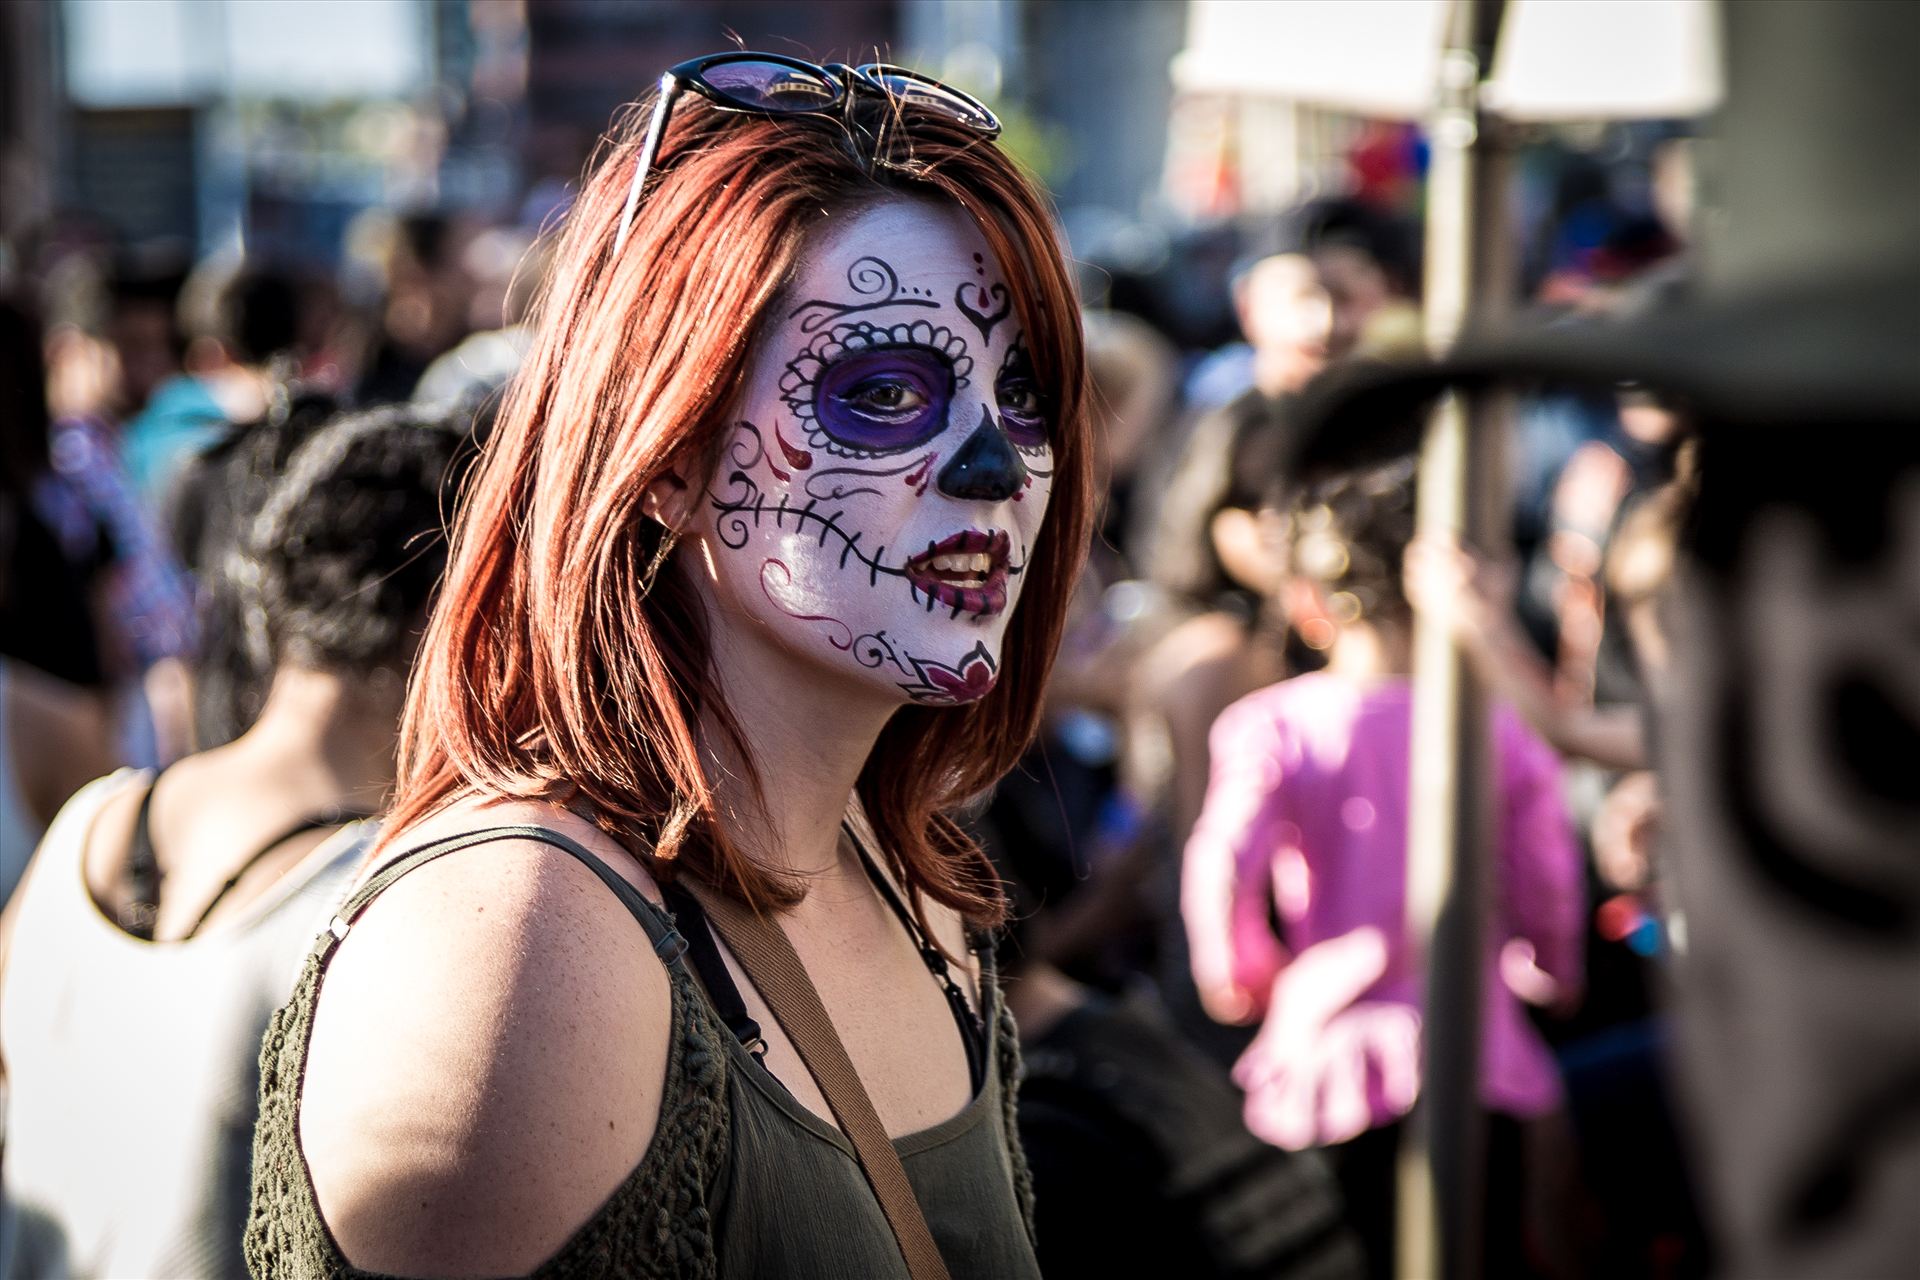 Denver Zombie Crawl 2015 21 - A redhead with day of the dead makeup at the Denver Zombie Crawl 2015 by Scott Smith Photos